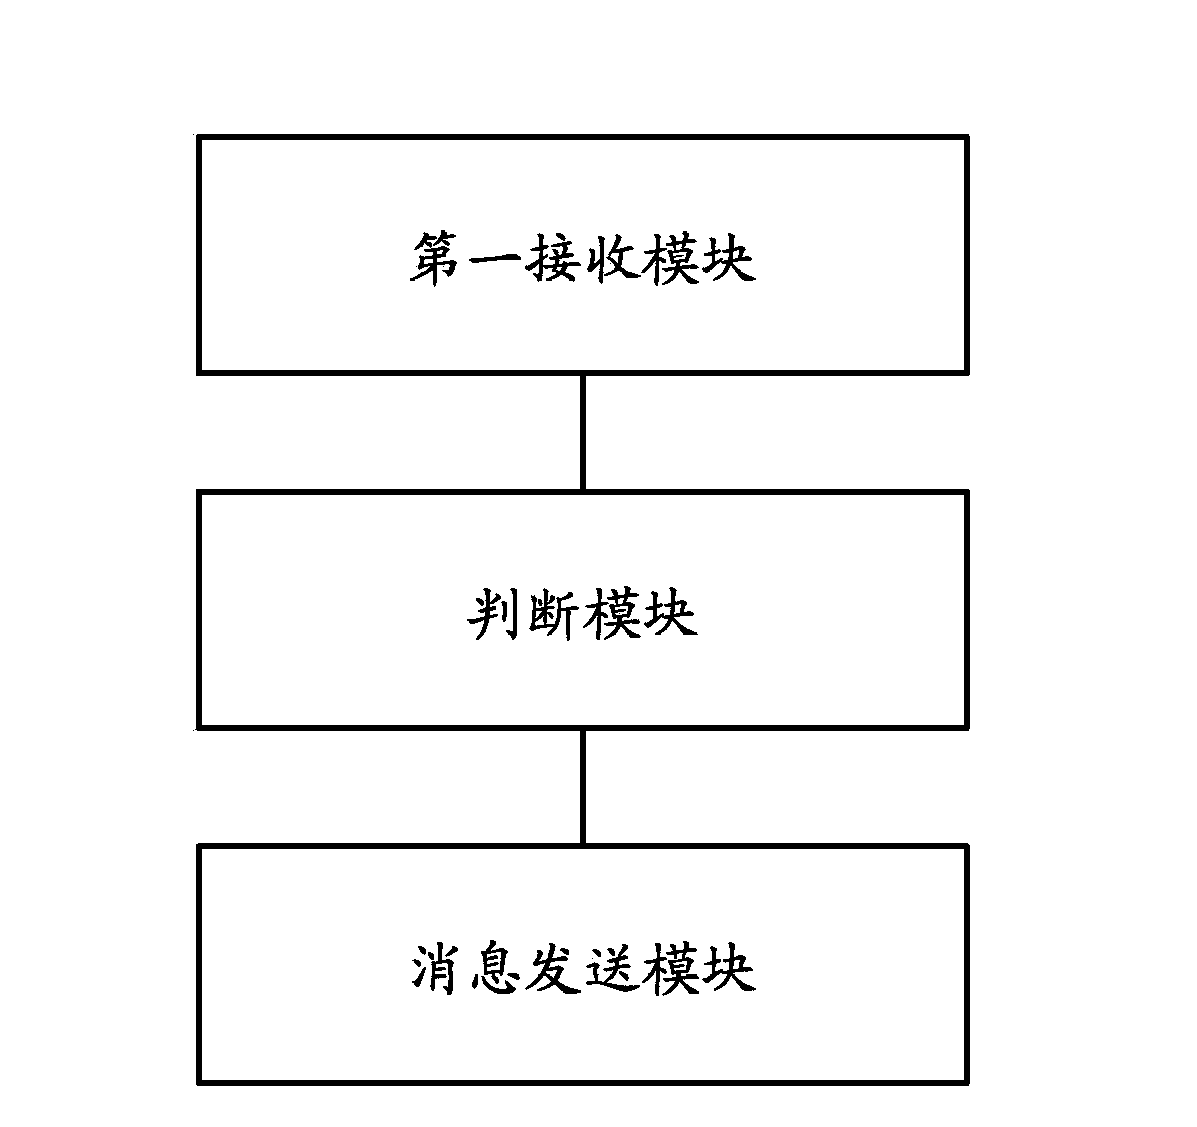 Network access control method and apparatus, network side device, and terminal